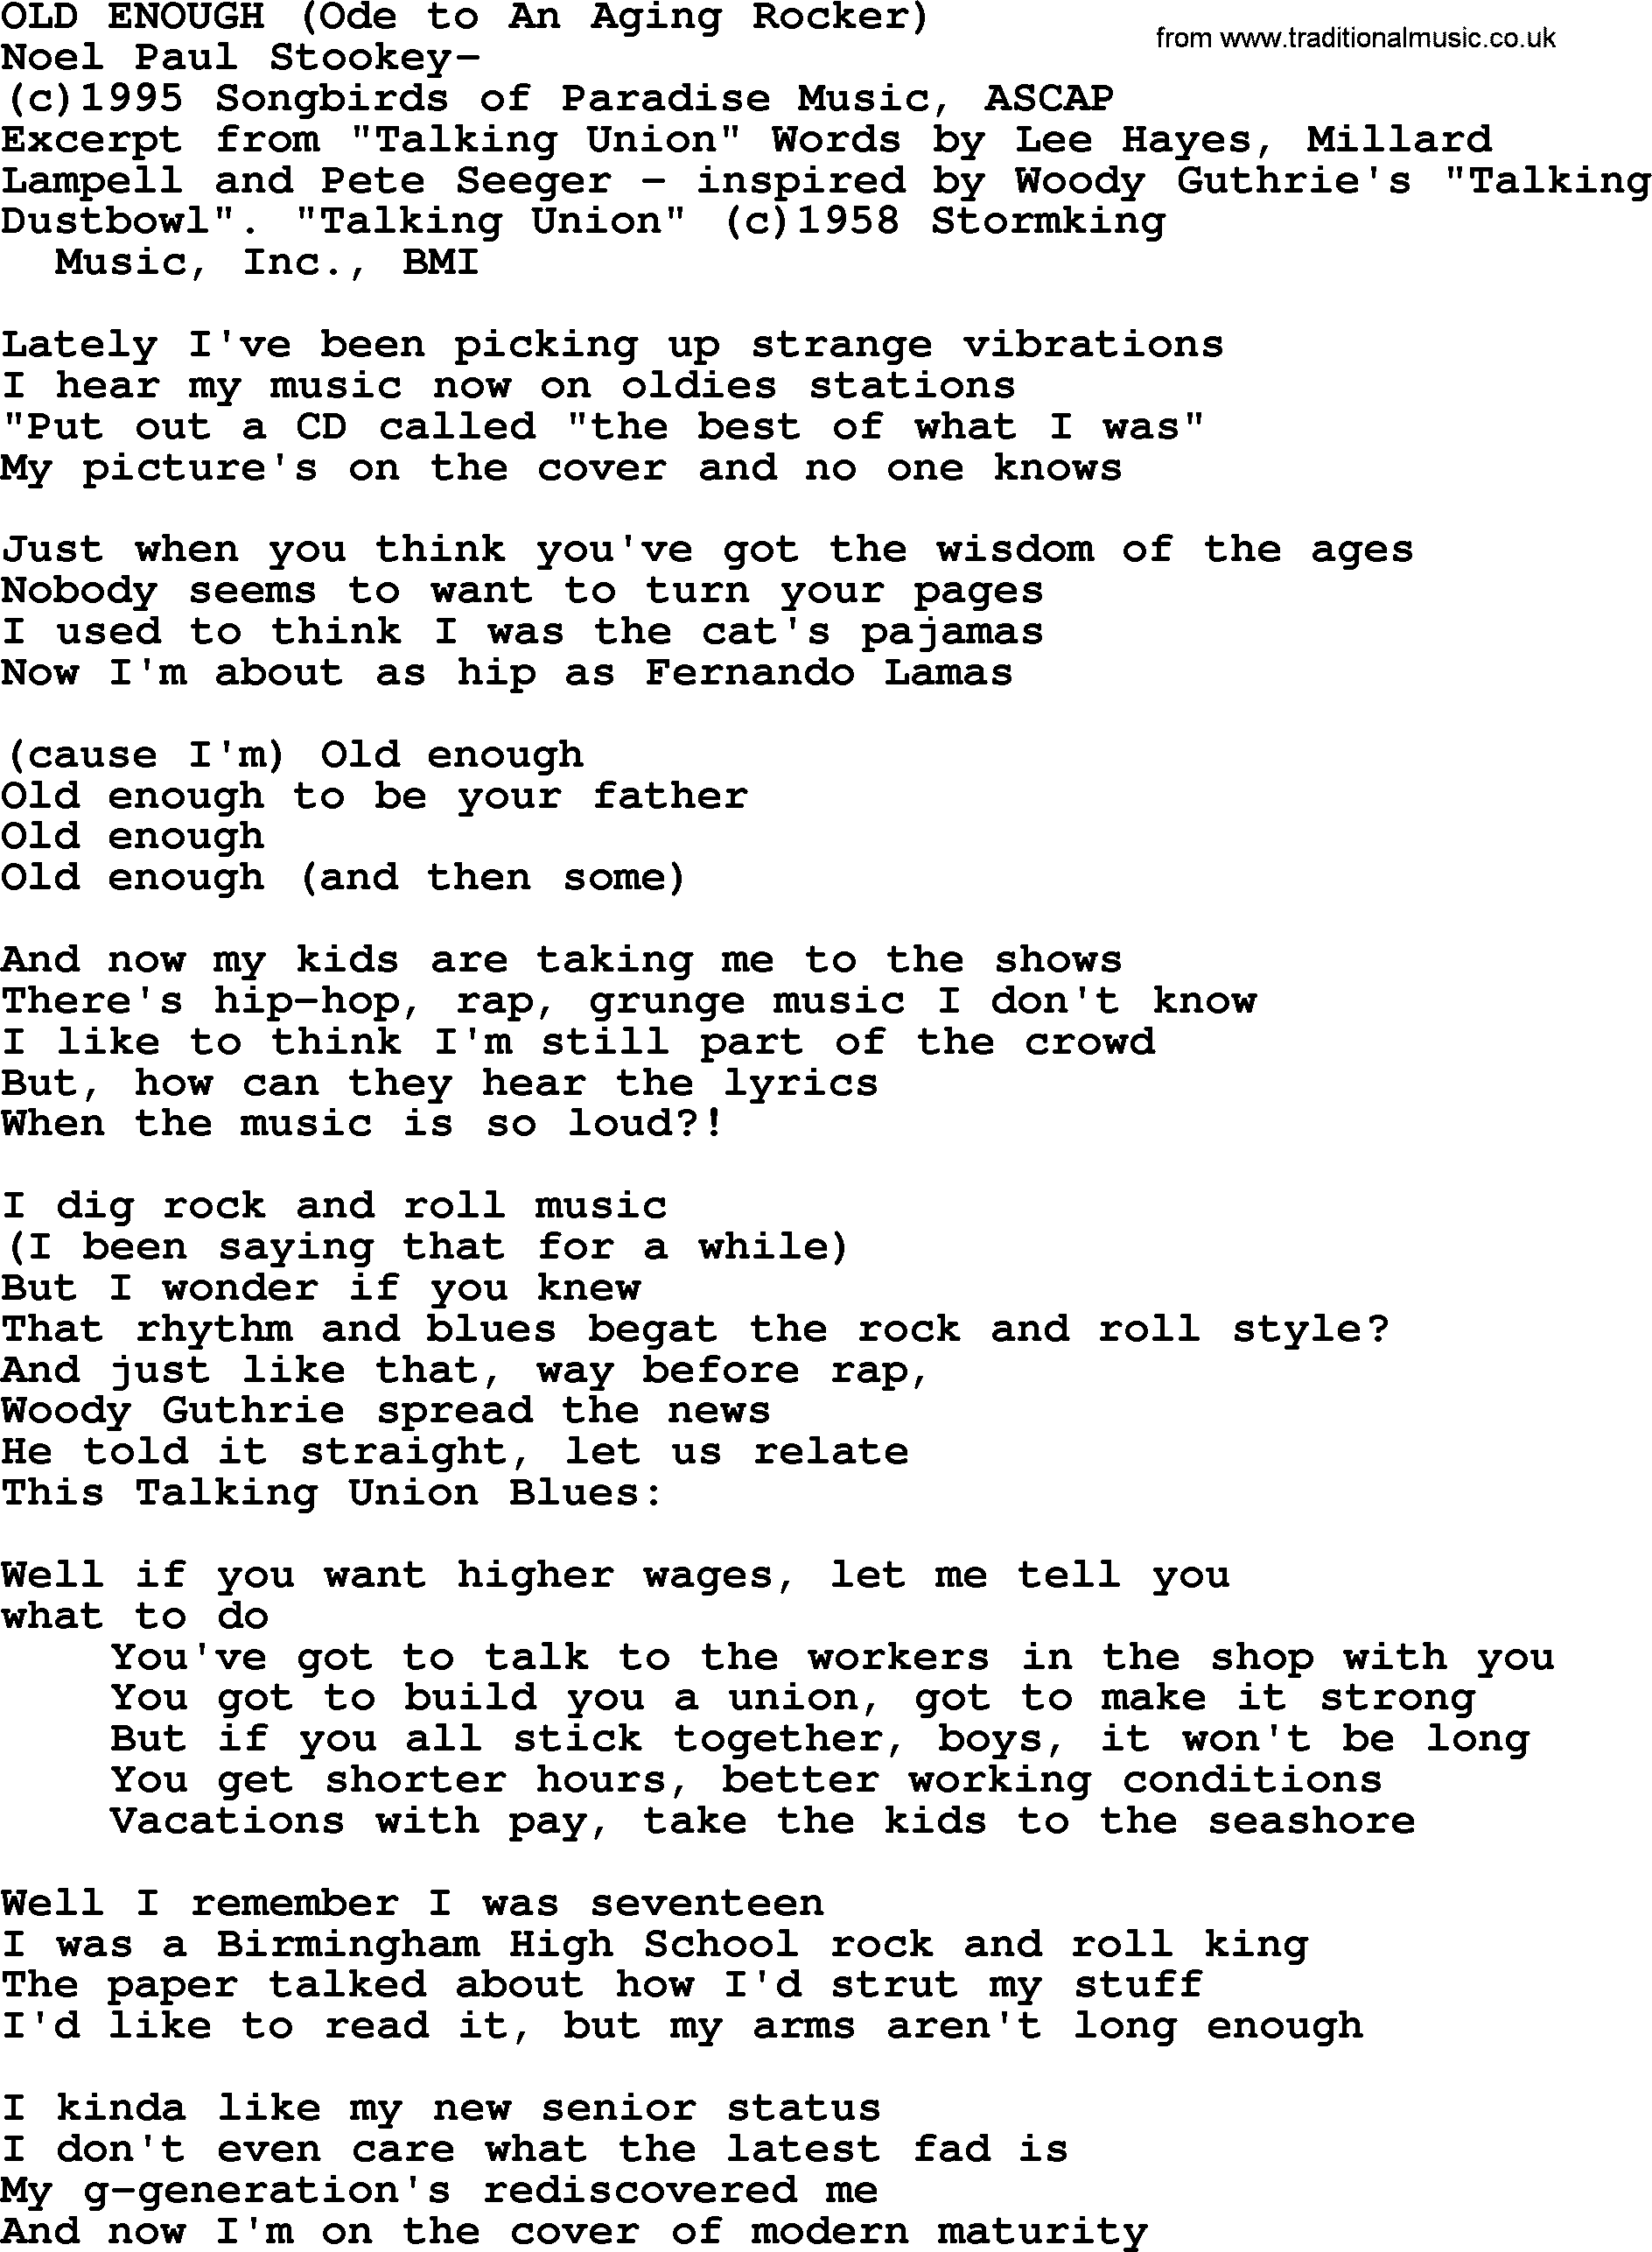 Peter, Paul and Mary song Old Enough (ode To An Aging Rocker) lyrics